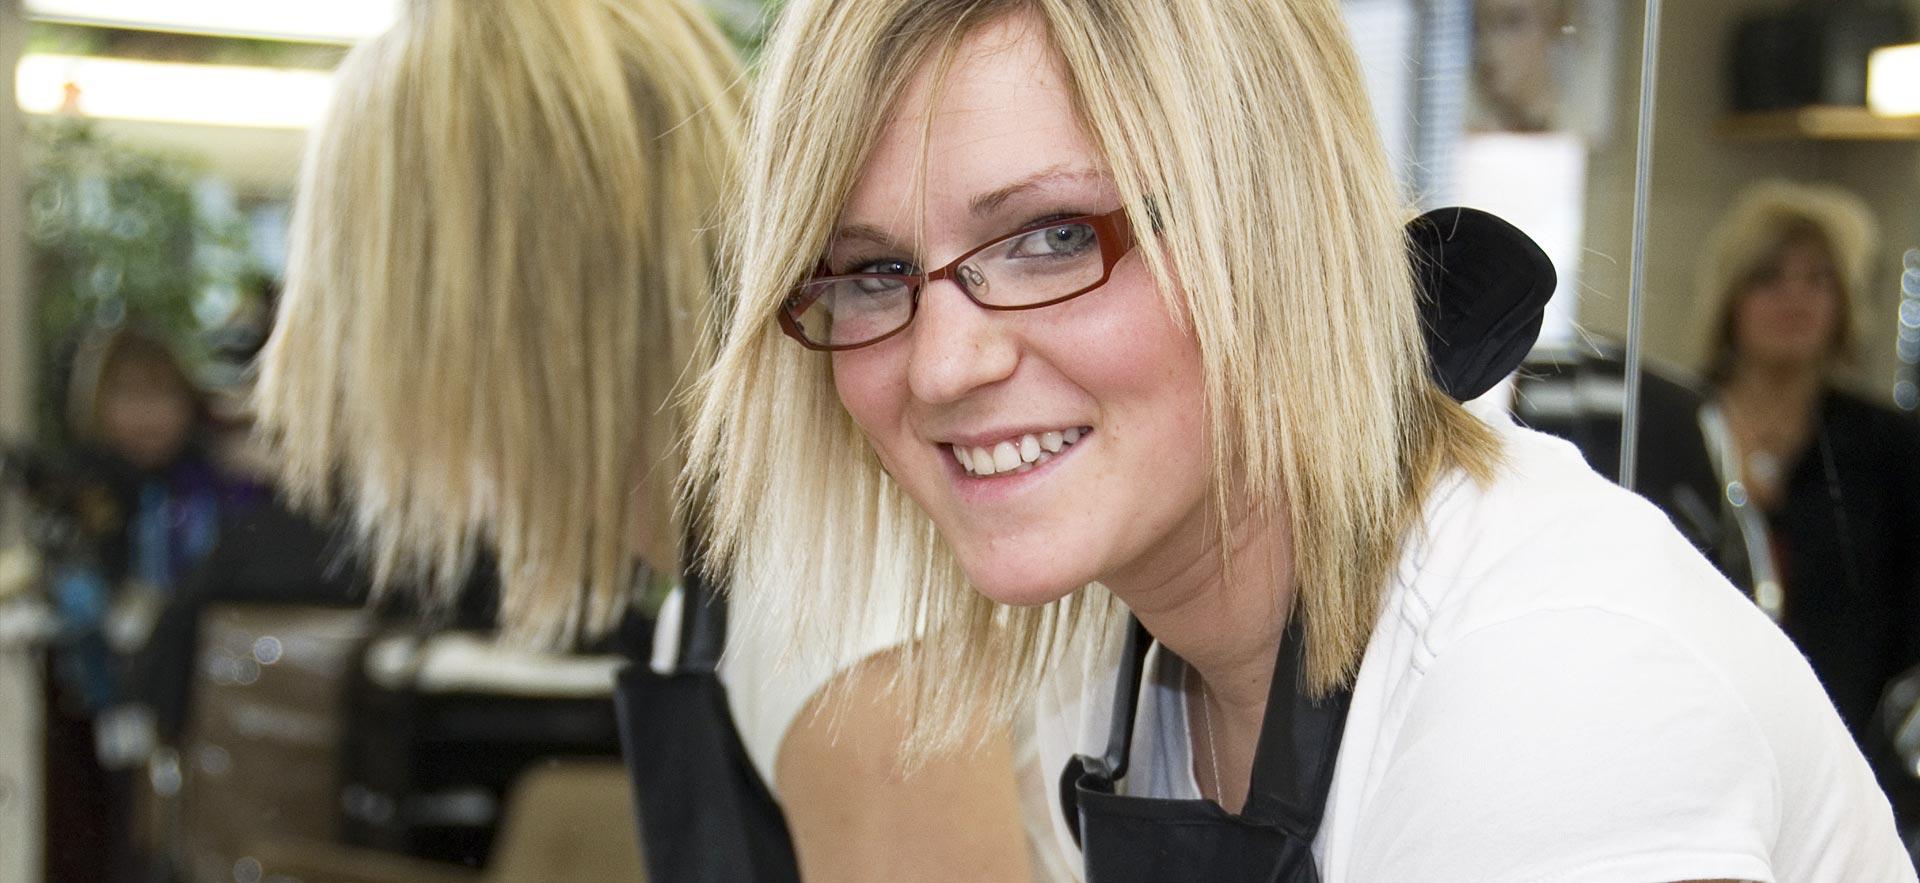 A female hairstylist student smiles for the camera in the hairstyling salon.